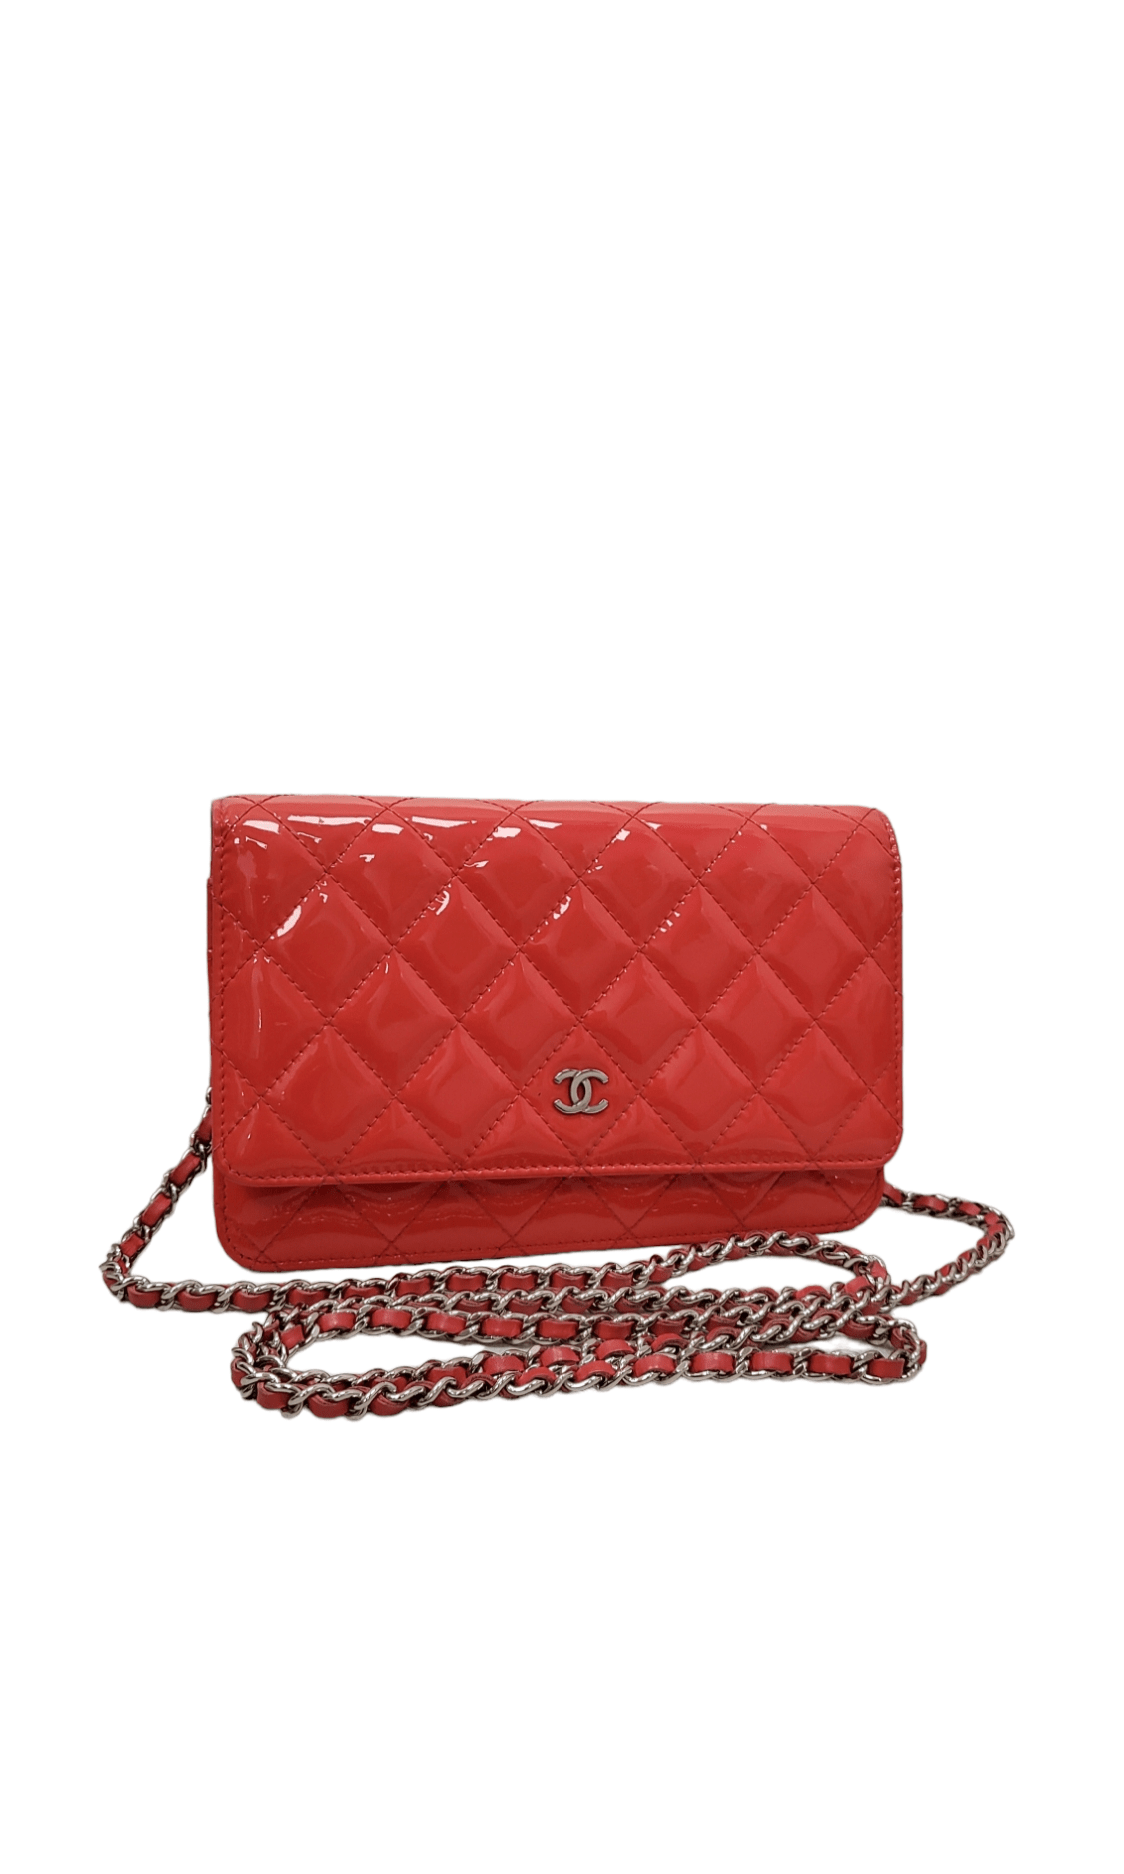 Chanel Chanel Wallet on Chain Pink SYC1057